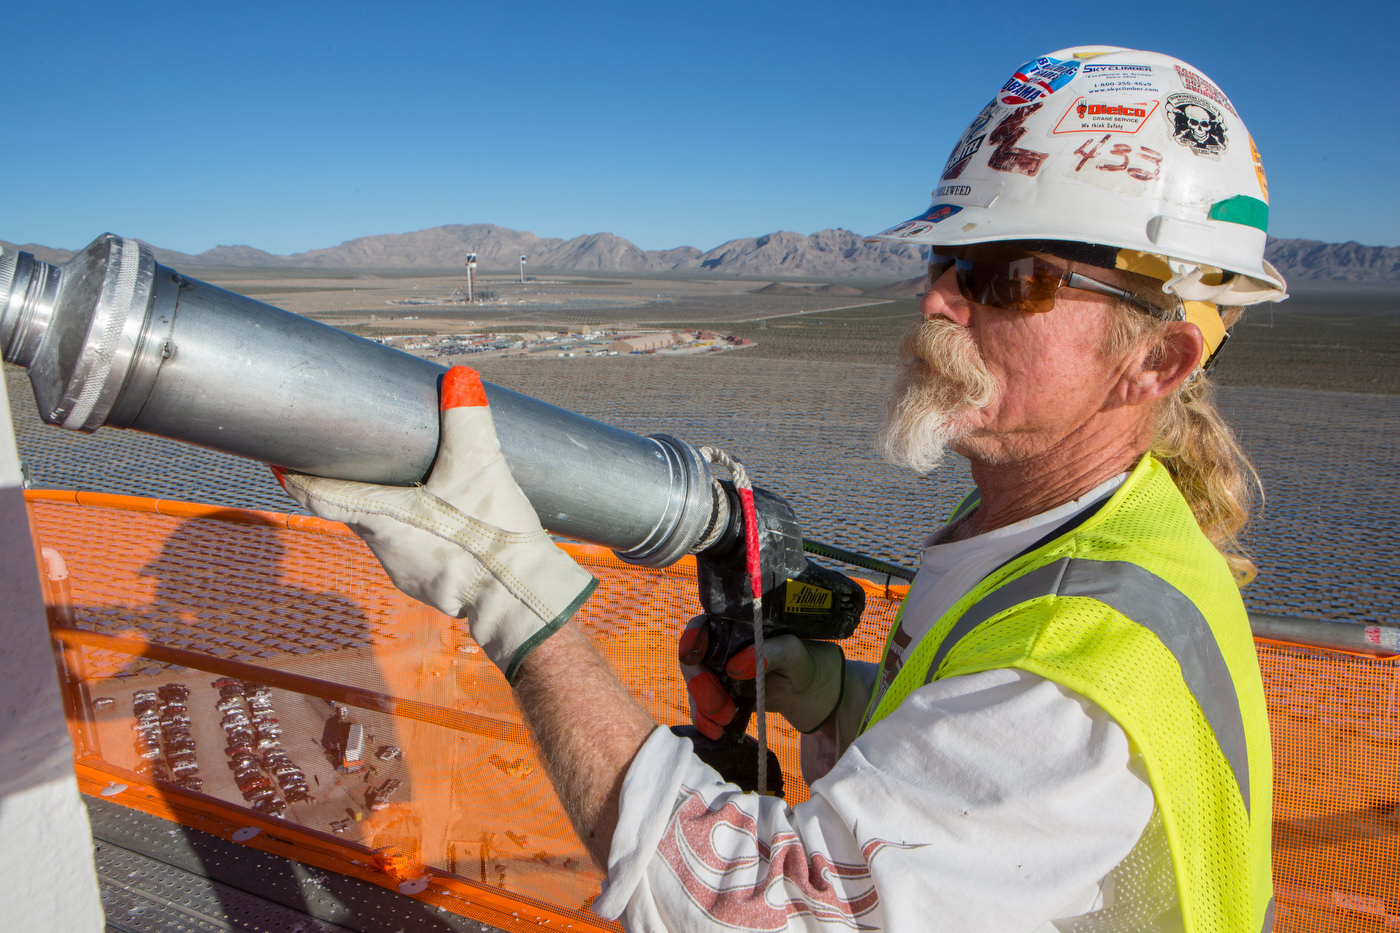 IVANPAH, CALIFORNIA, OCTOBER 18 2012: Iron Worker {quote}Tumblewwed{quote} apples caulking to the white panels atop Tower 1, with Tower 2 and 3 visible in the background at the Ivanpah Solar Project (photo Gilles Mingasson/Getty Images for Bechtel).